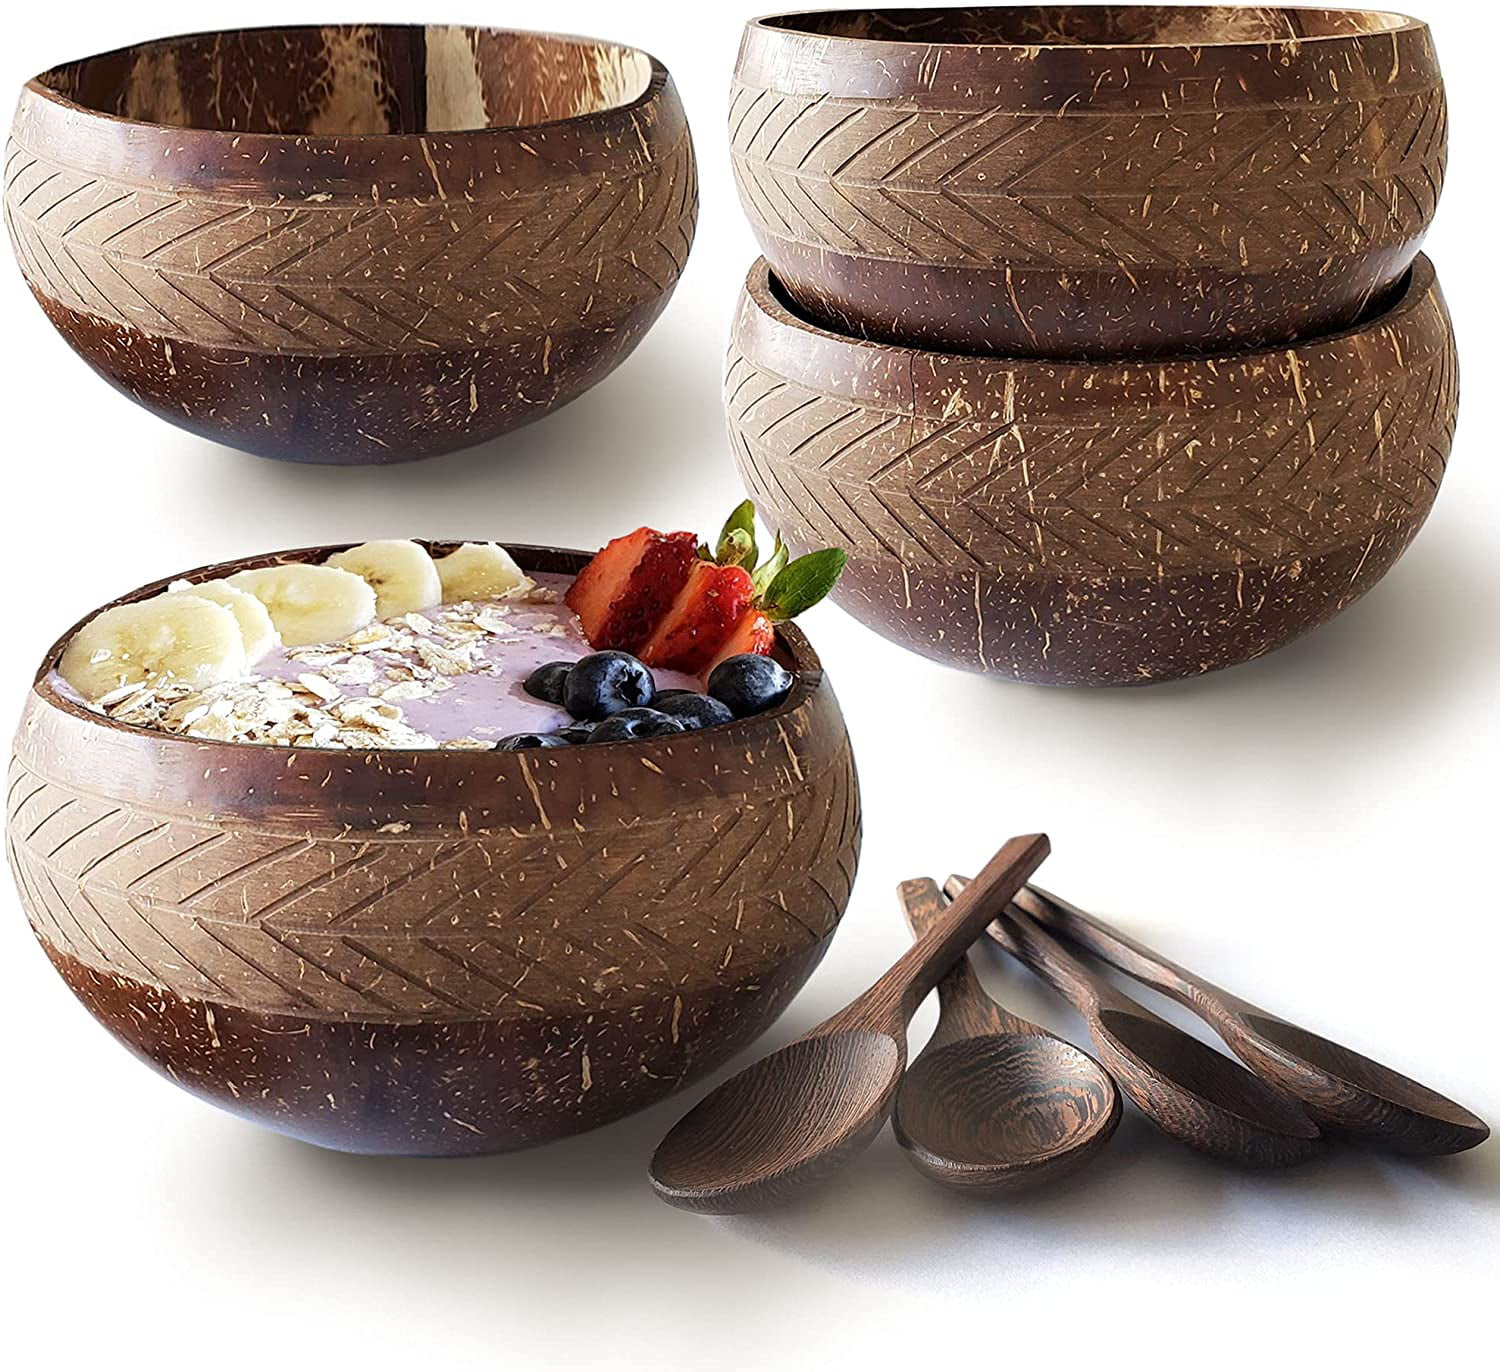 Hand-Carved Design Coconut Bowl Set of 4 Coconut bowls for smoothies Acai bowls Smoothie bowls and spoons Coconut smoothie bowls Buddha bowls Unique NAYOMI Coconut Bowls with Spoons